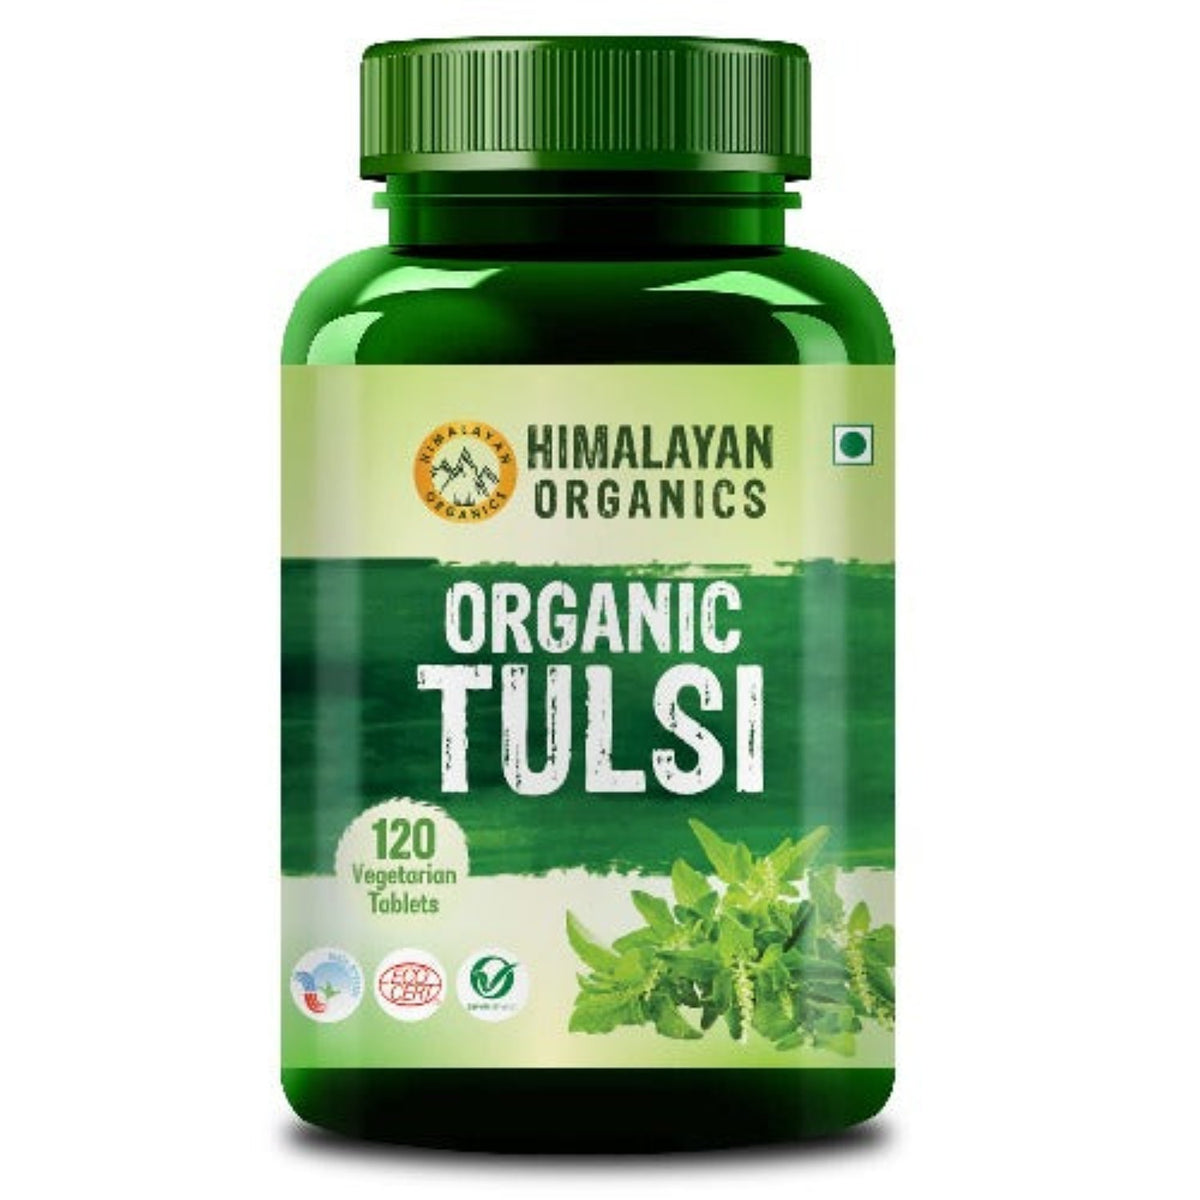 Himalayan Organics Organic Tulsi Tablets Holy Basil Provides Relief In Cough & Cold Natural Immunity Booster (120 Tablets)